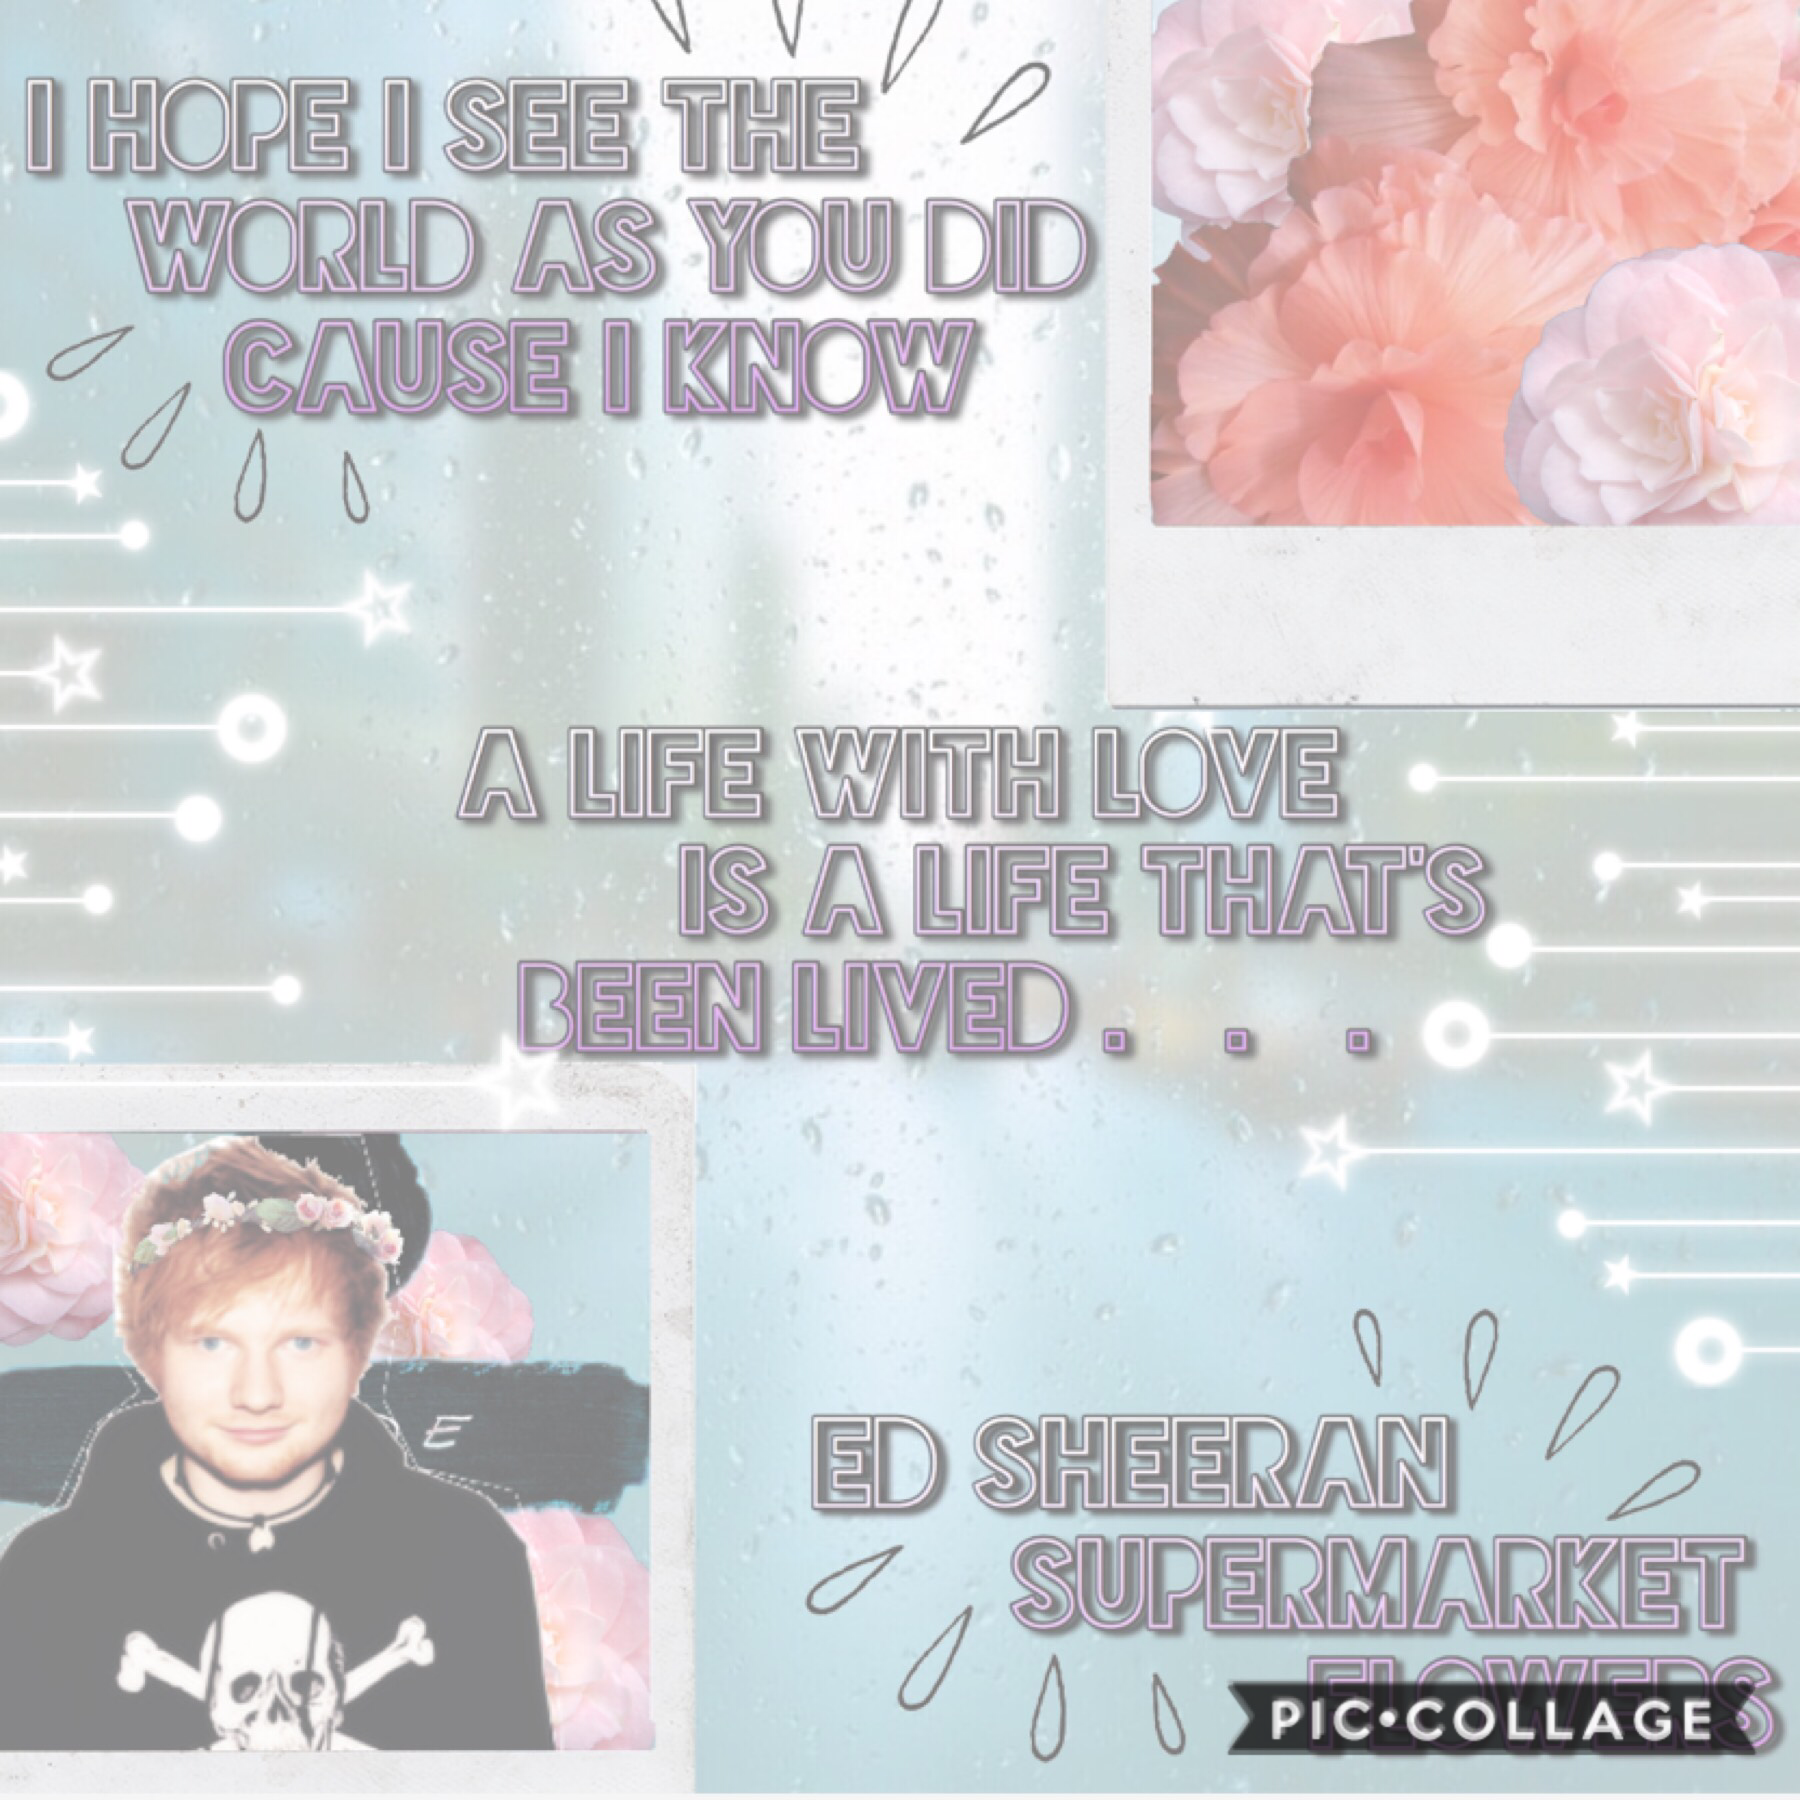 Hope you guys like this lyric edit should I do more like this? Lemme know what you think and rate 1-10